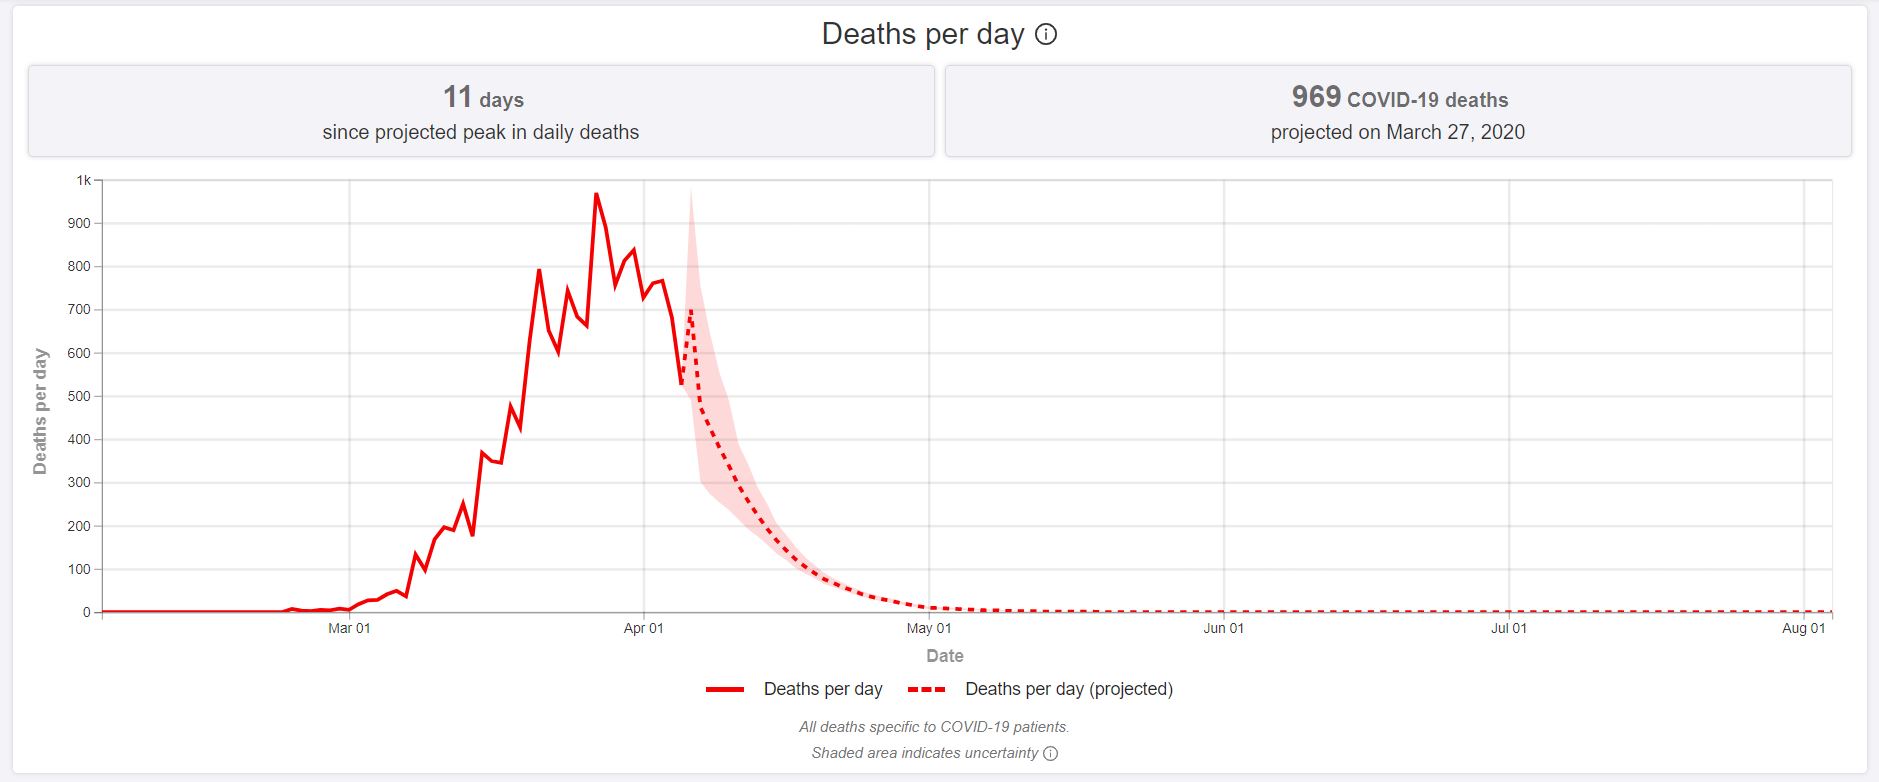 Daily deaths in Italy